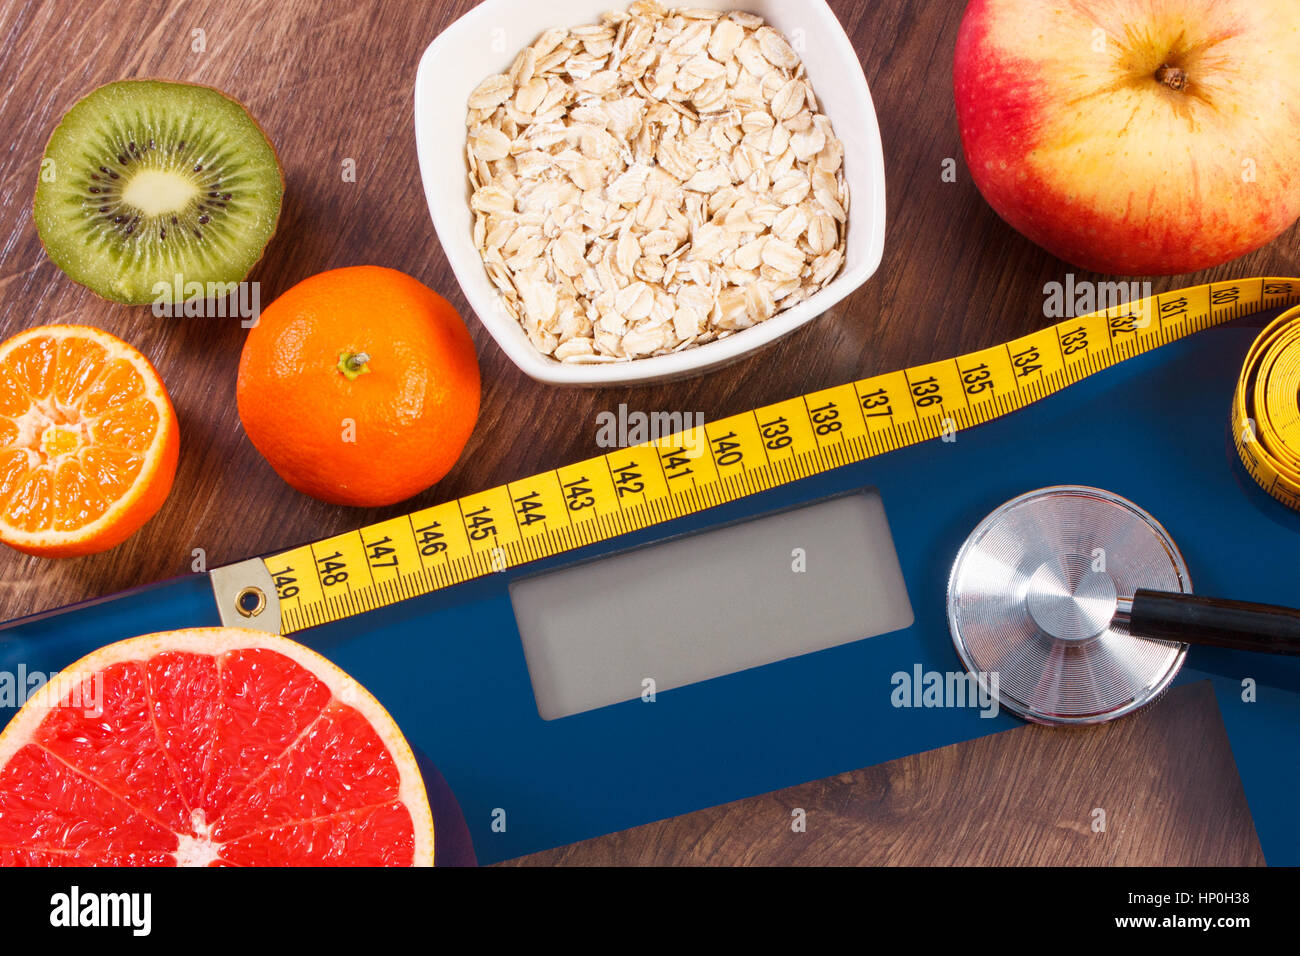 Measuring tape wrapped around bathroom scales. Concept of weight loss, diet,  healthy lifestyle., Stock image